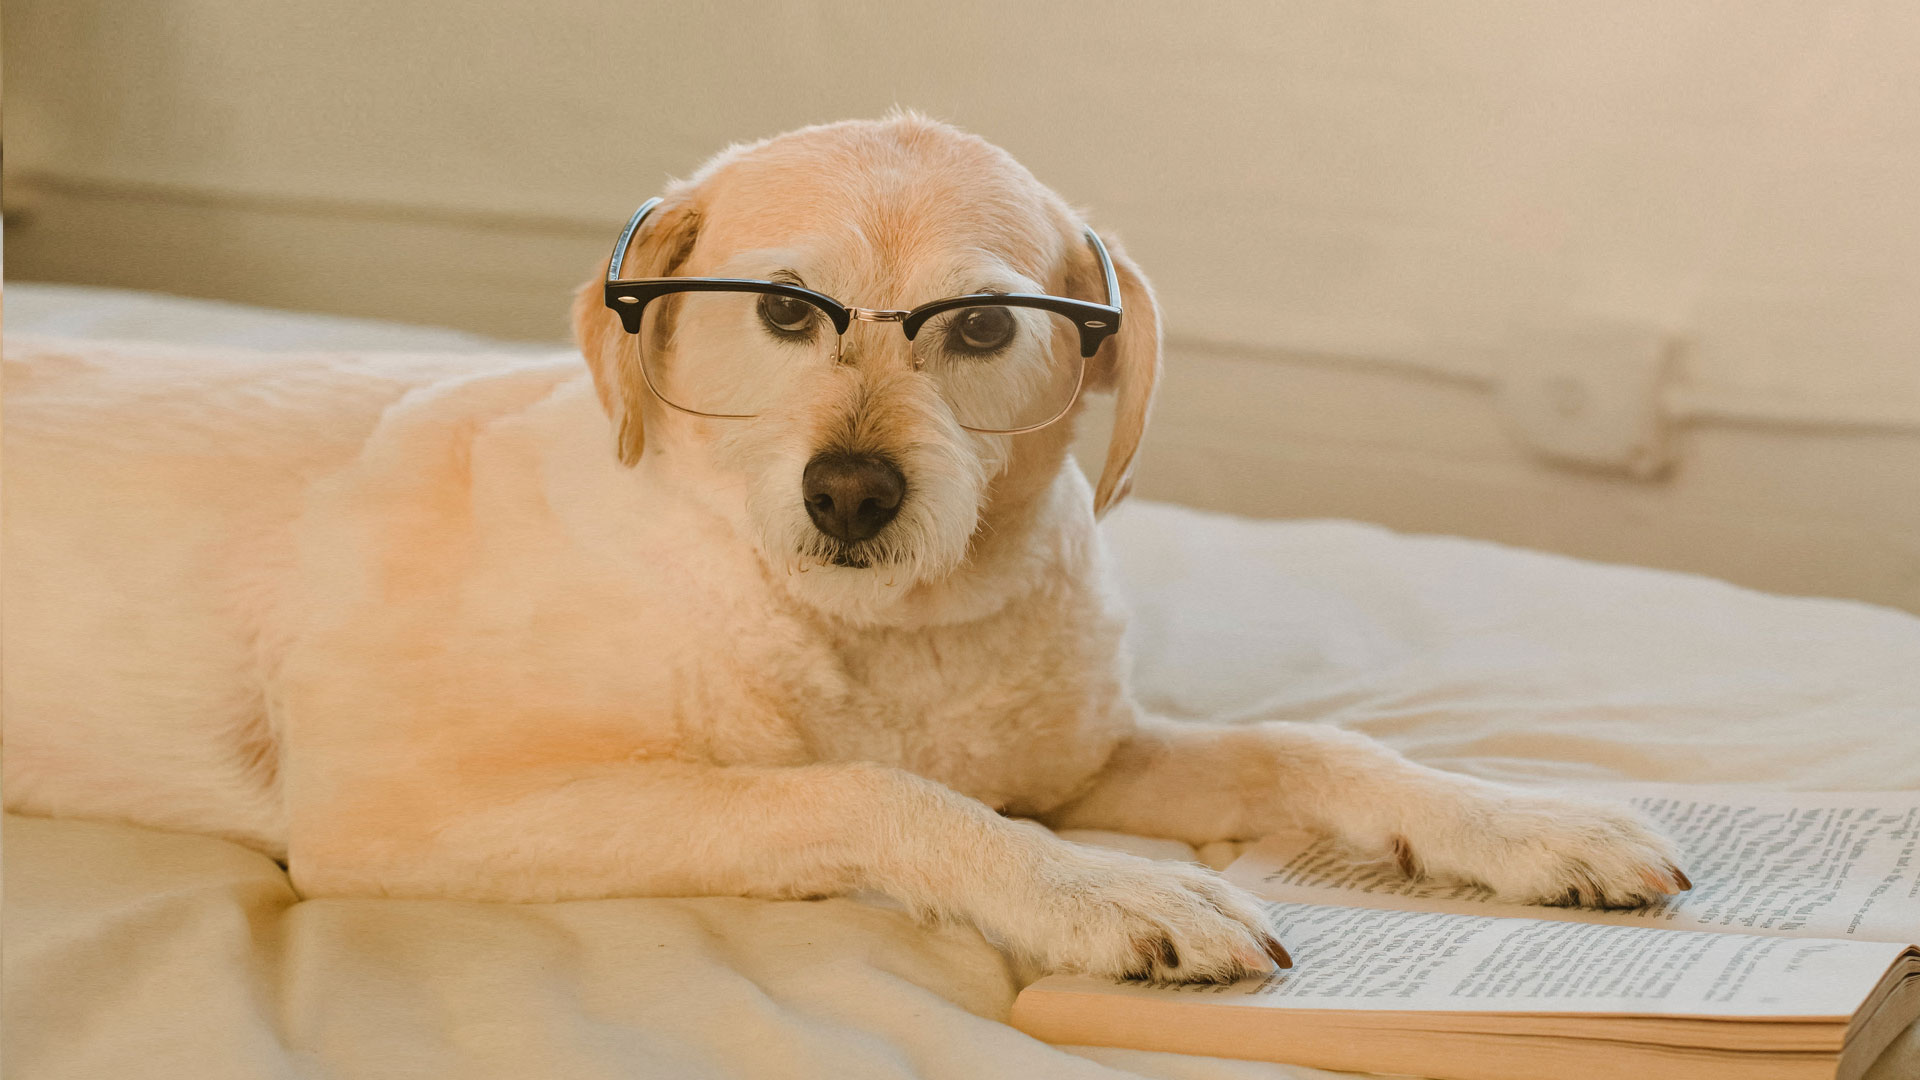 Dog wearing glasses with book